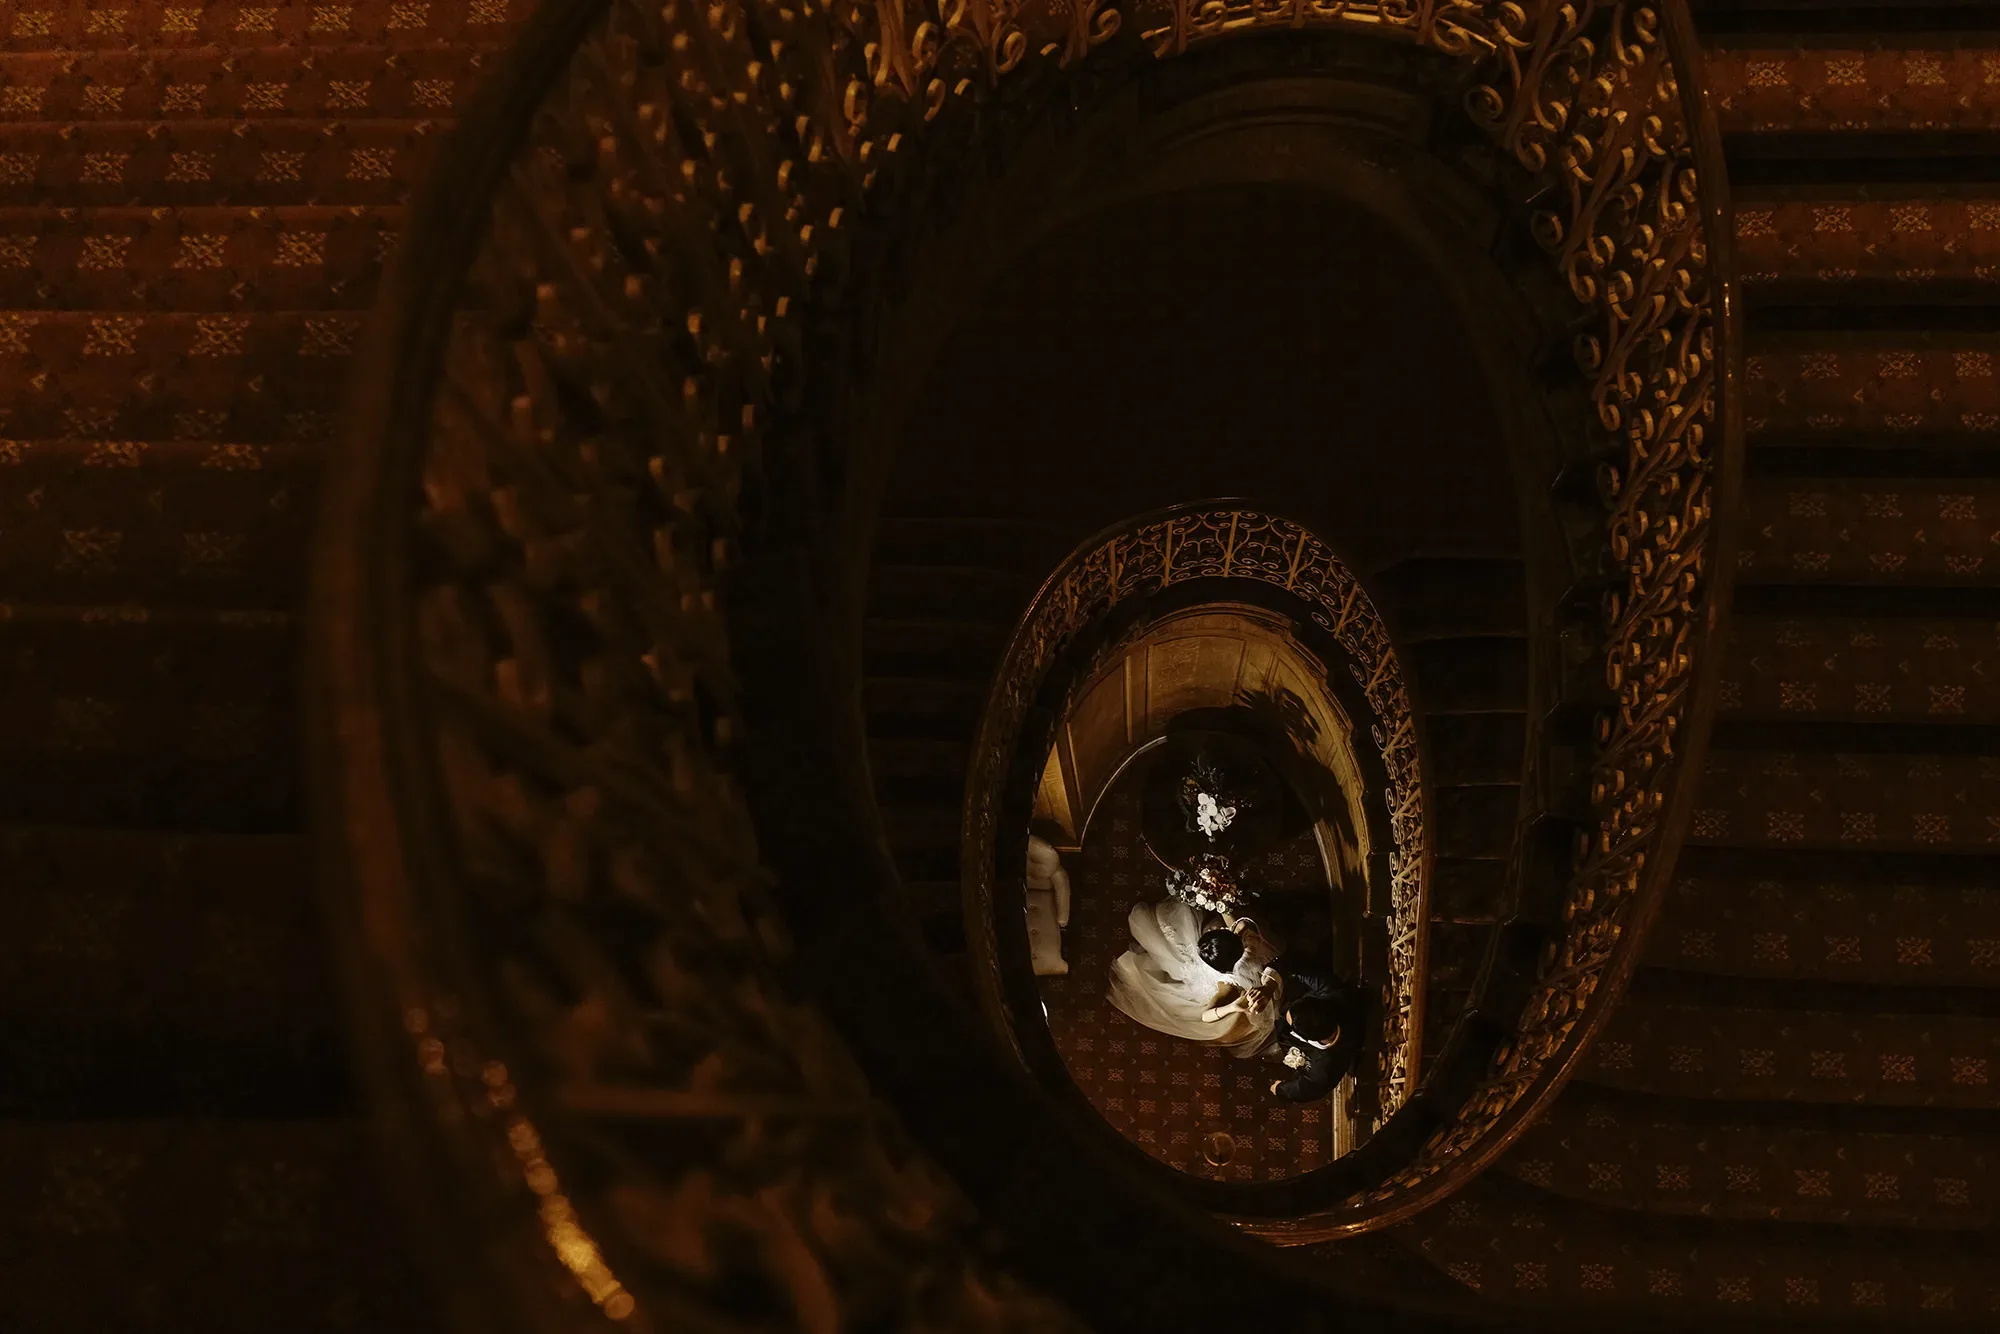 An ornate, spiral staircase at the Fairmont Olympic Hotel, viewed from above and illuminated by soft lighting, with a person captured in motion at the bottom standing next to a statue. captured by Seattle Wedding Photographers Jenn Tai & Co